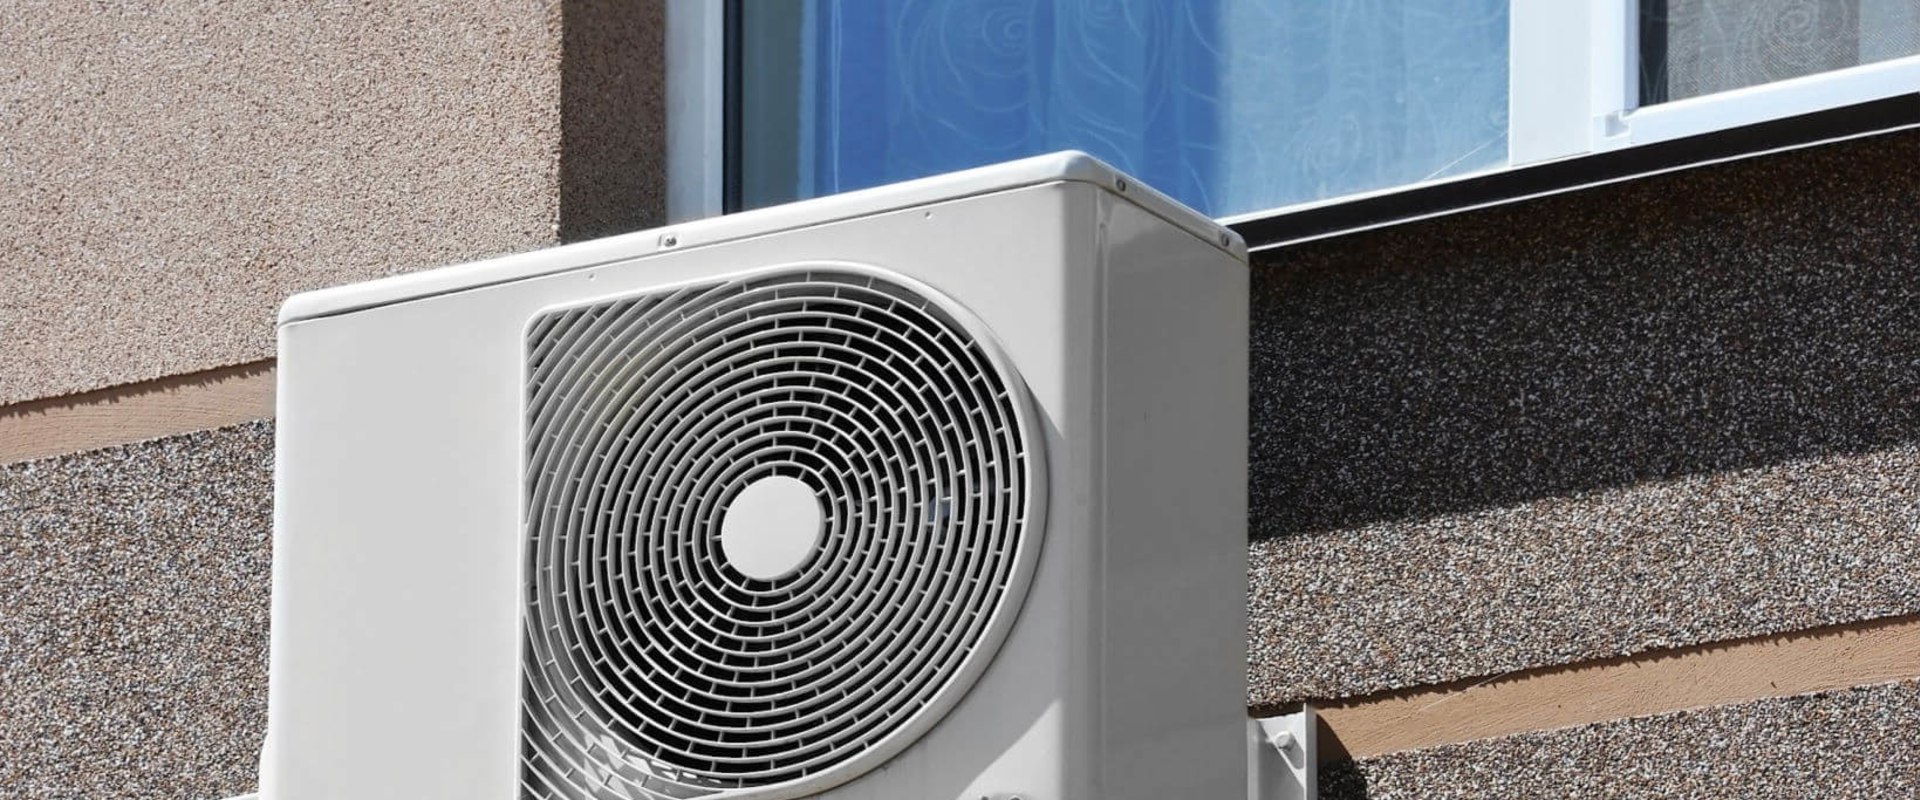 The Evolution of Air Conditioning Terminology in America